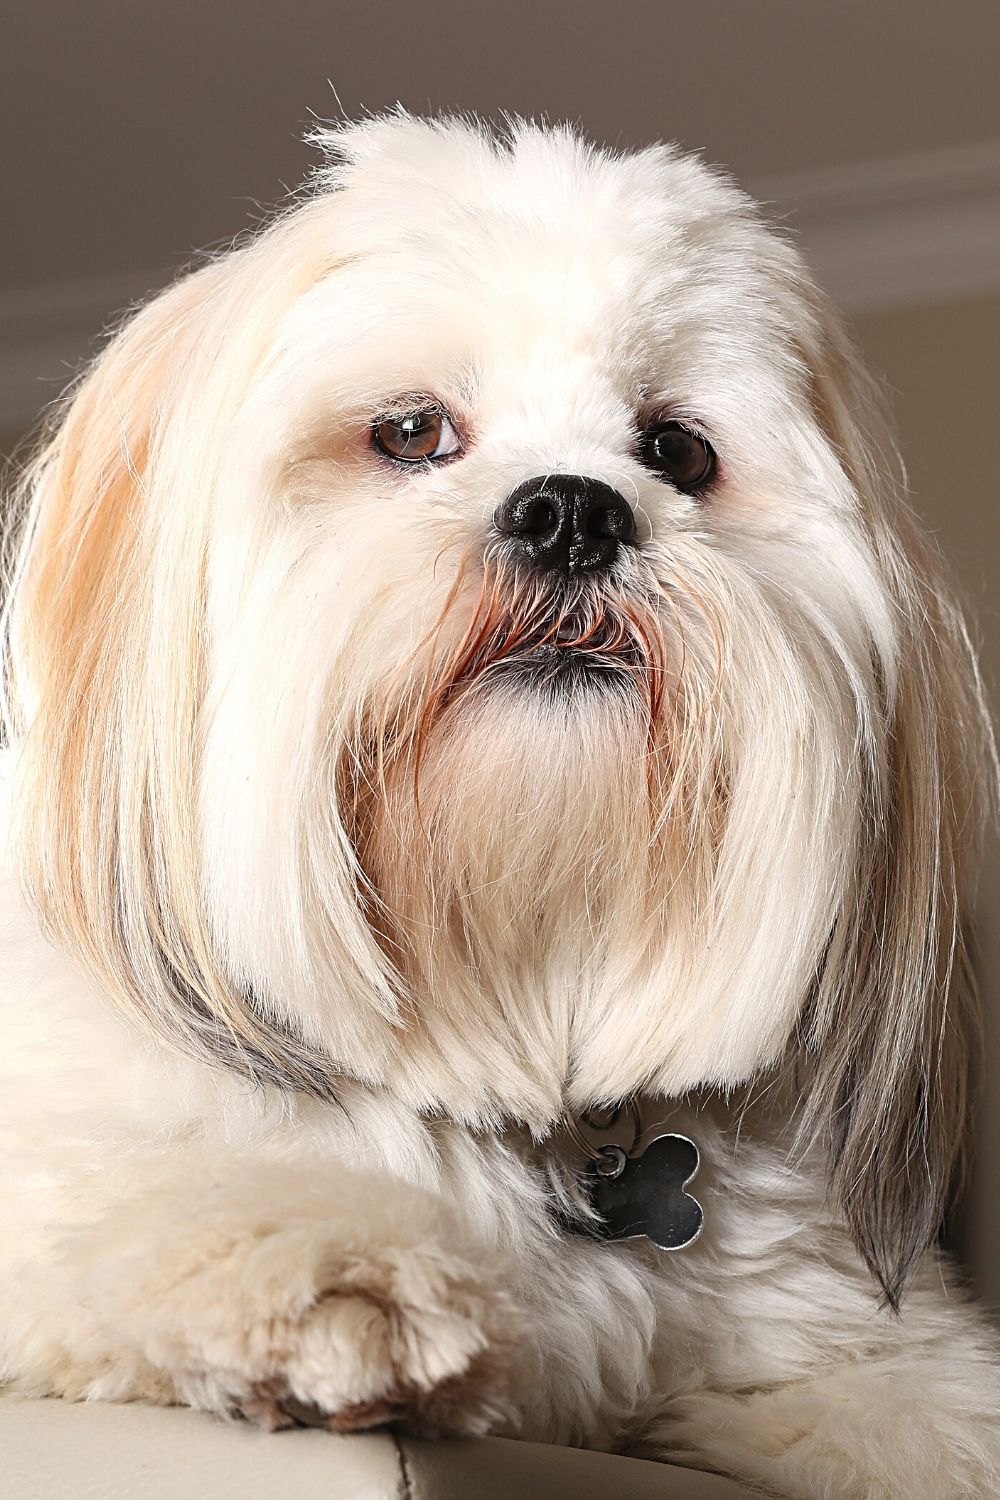 The Lhasa Apso is the sweetest dog breeds that looks like the Ewoks from Star Wars